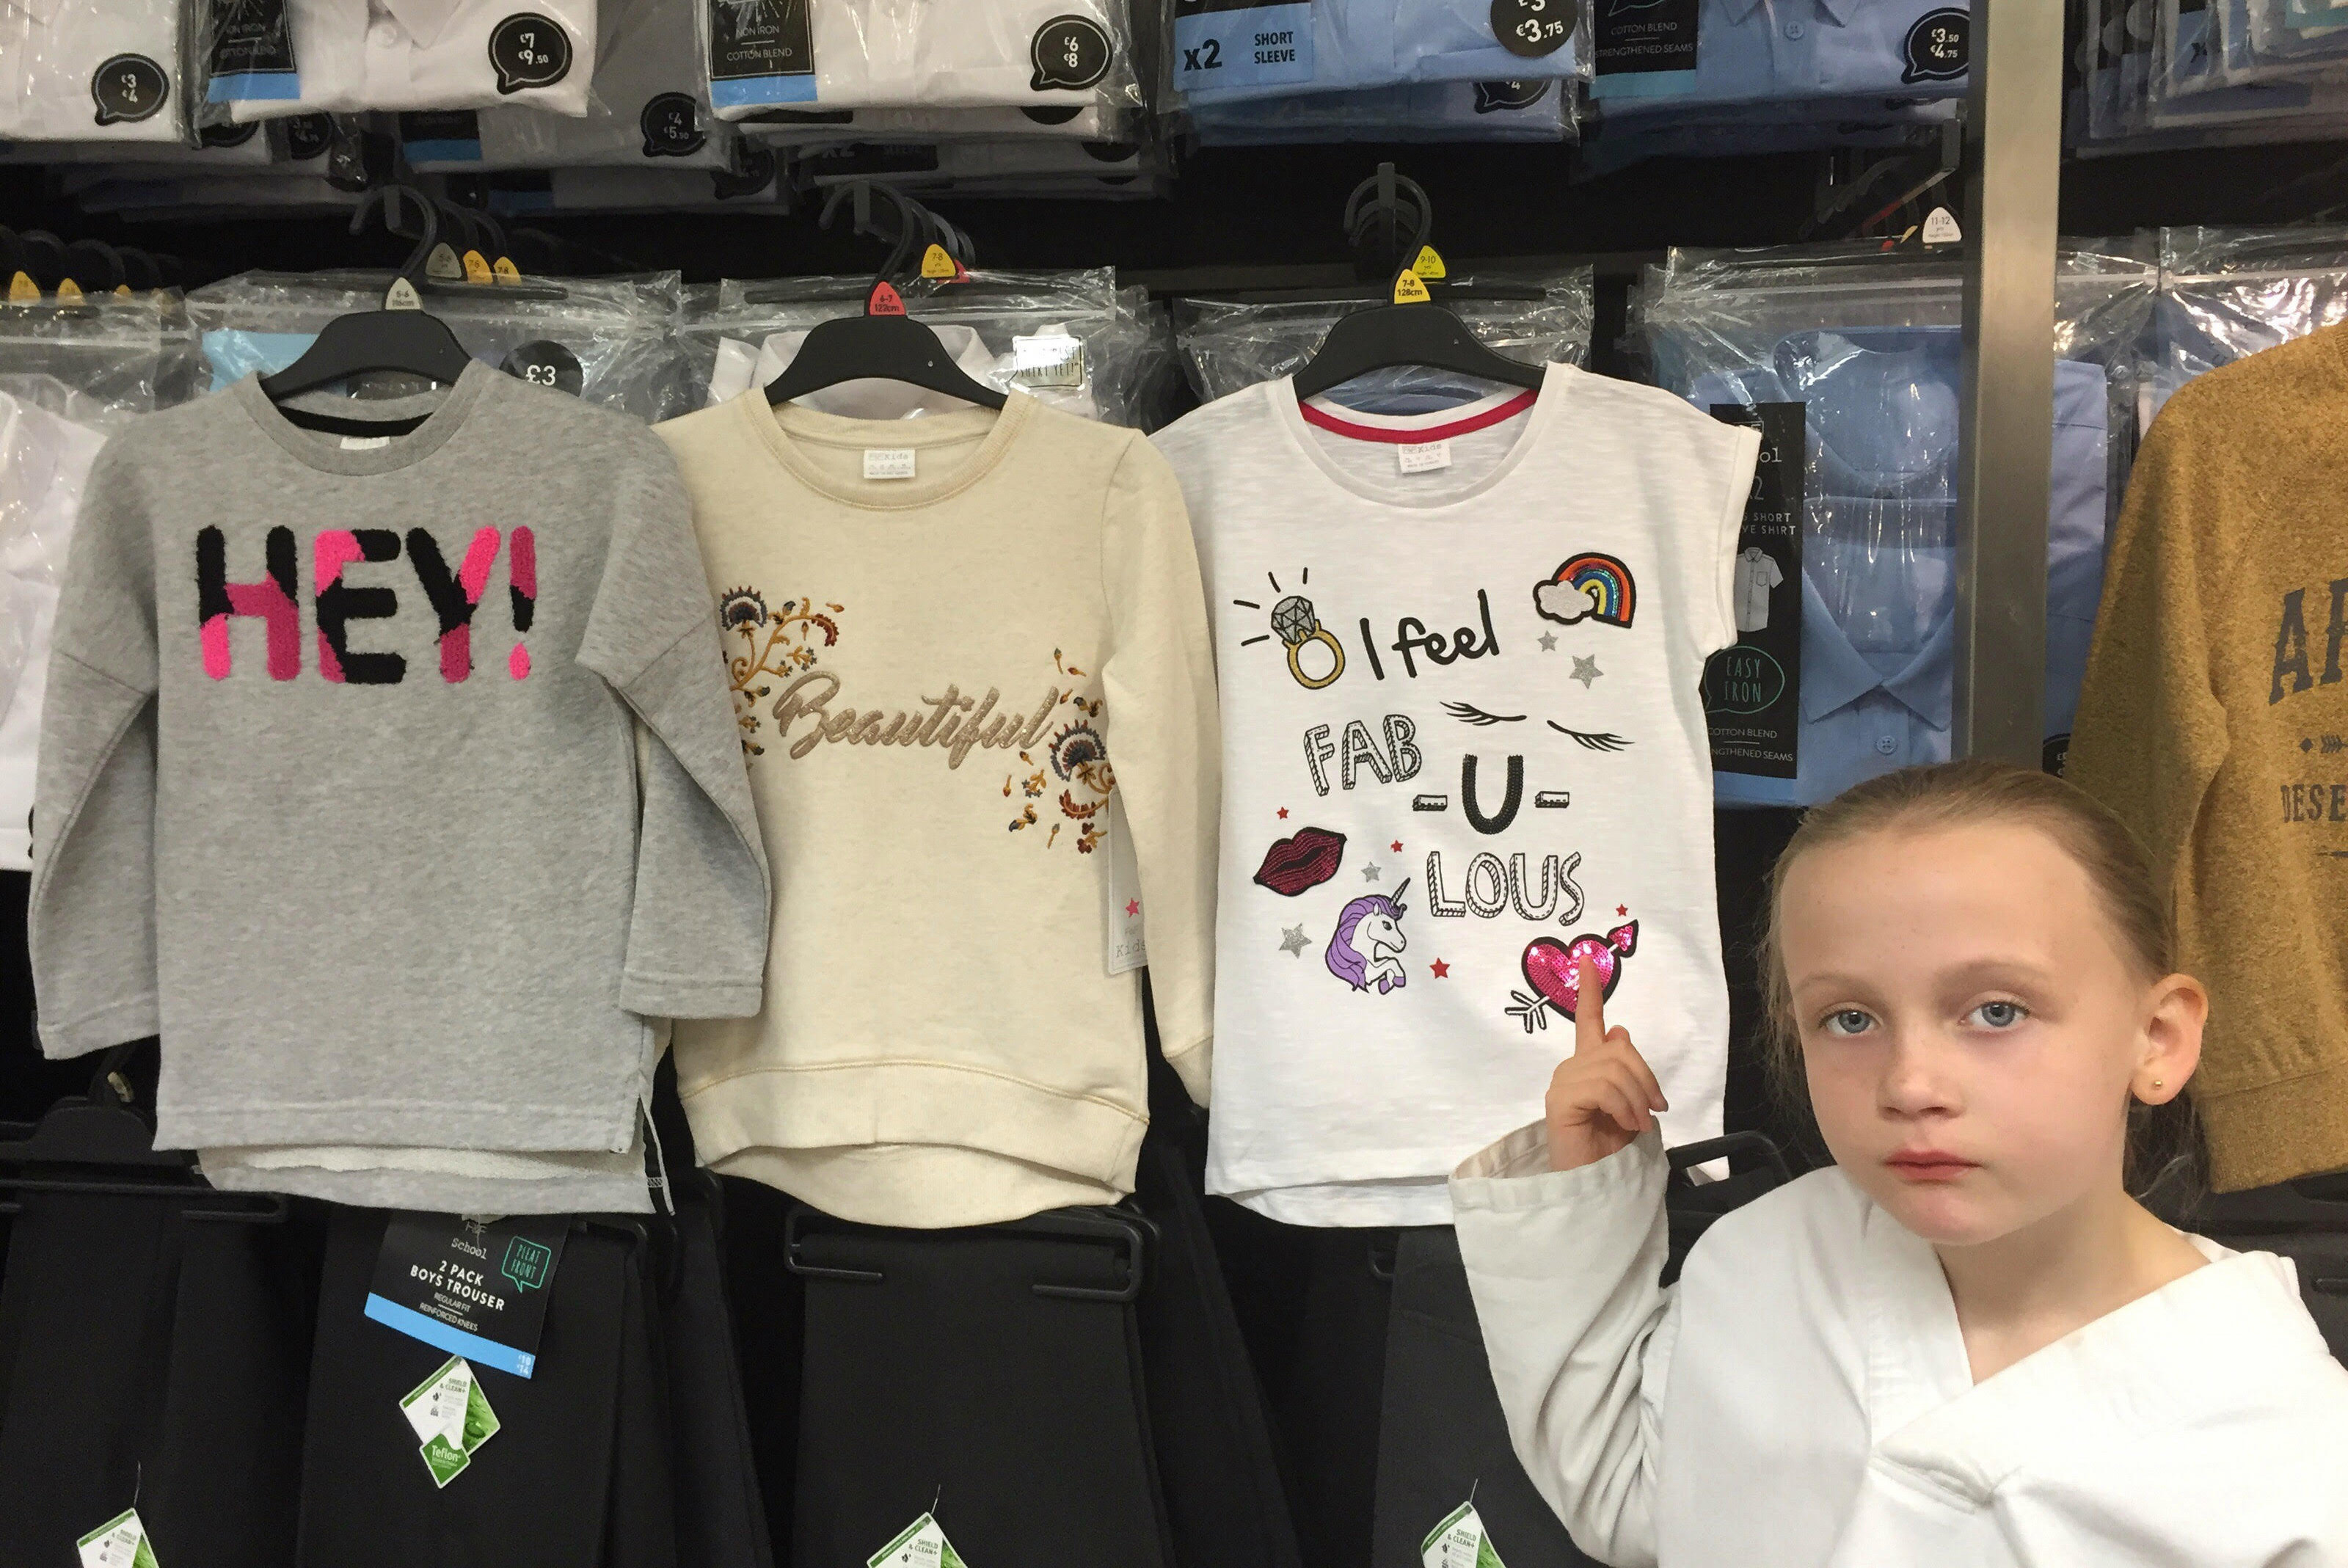 Selling 'Sexist' Kids' Clothing 